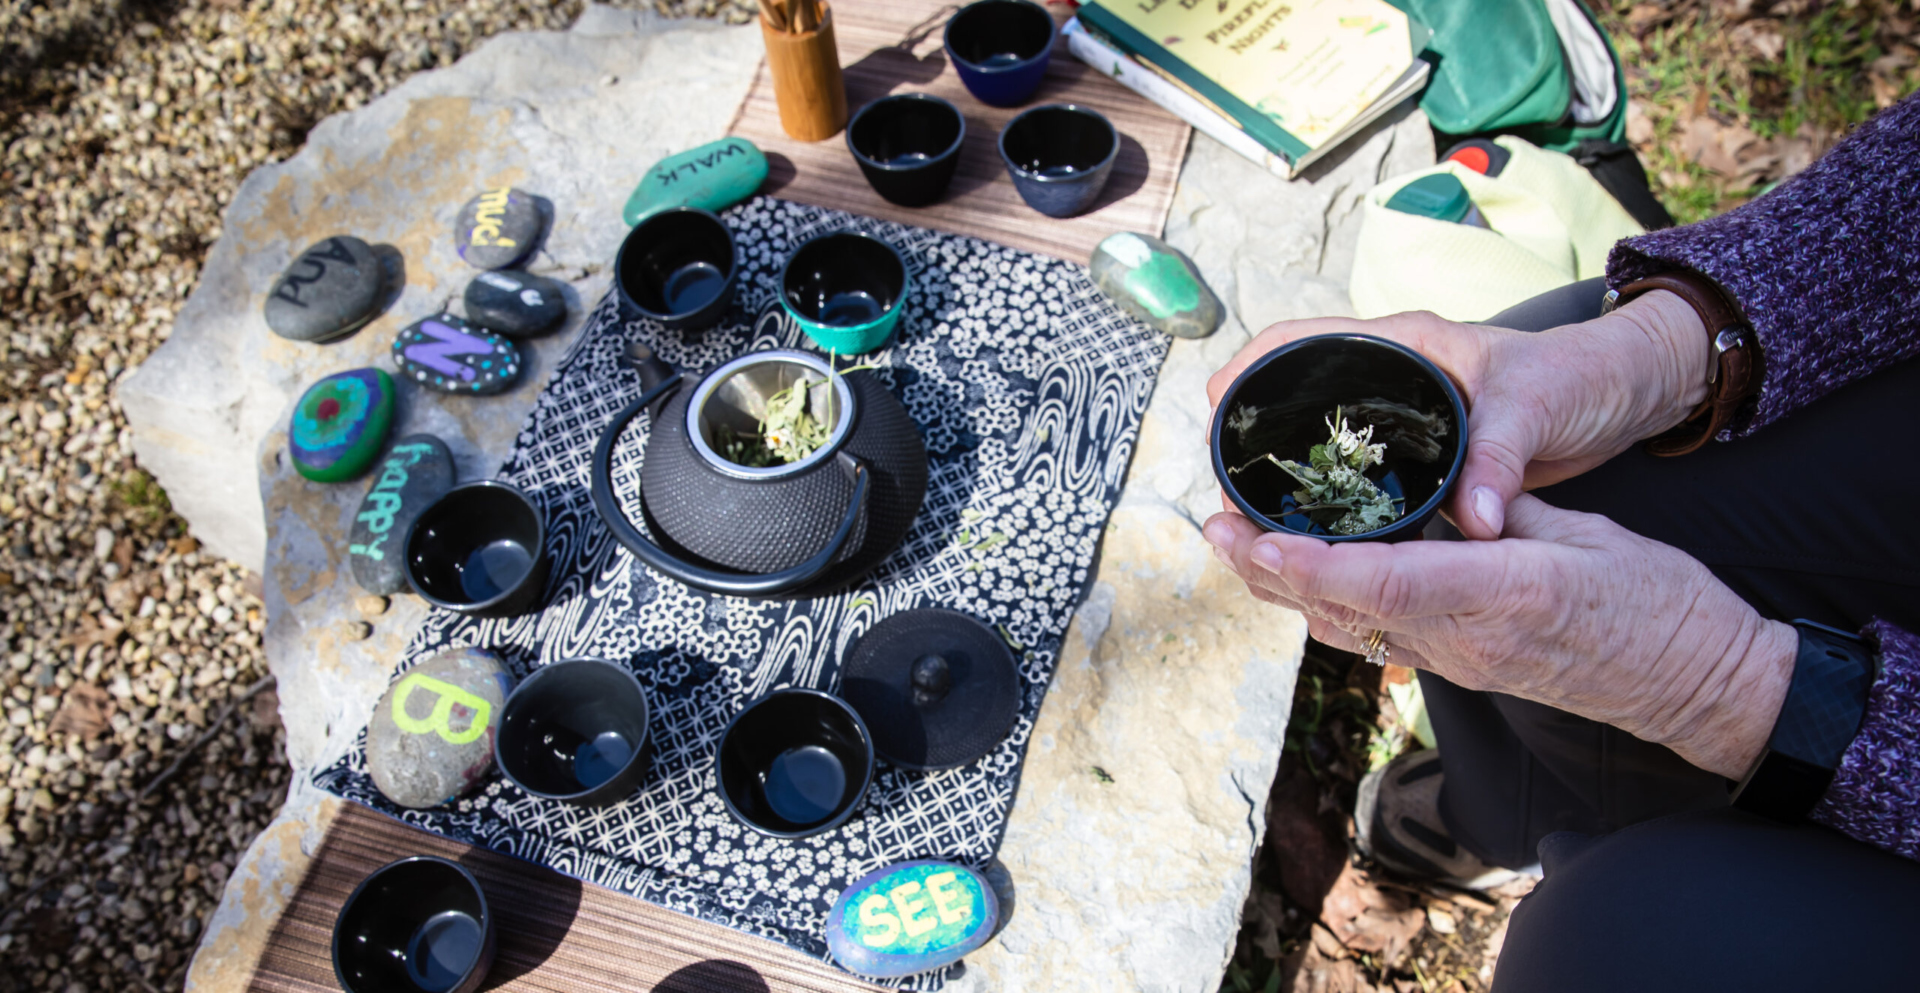 A tea ceremony set up in the middle of the woods during a forest therapy walk.